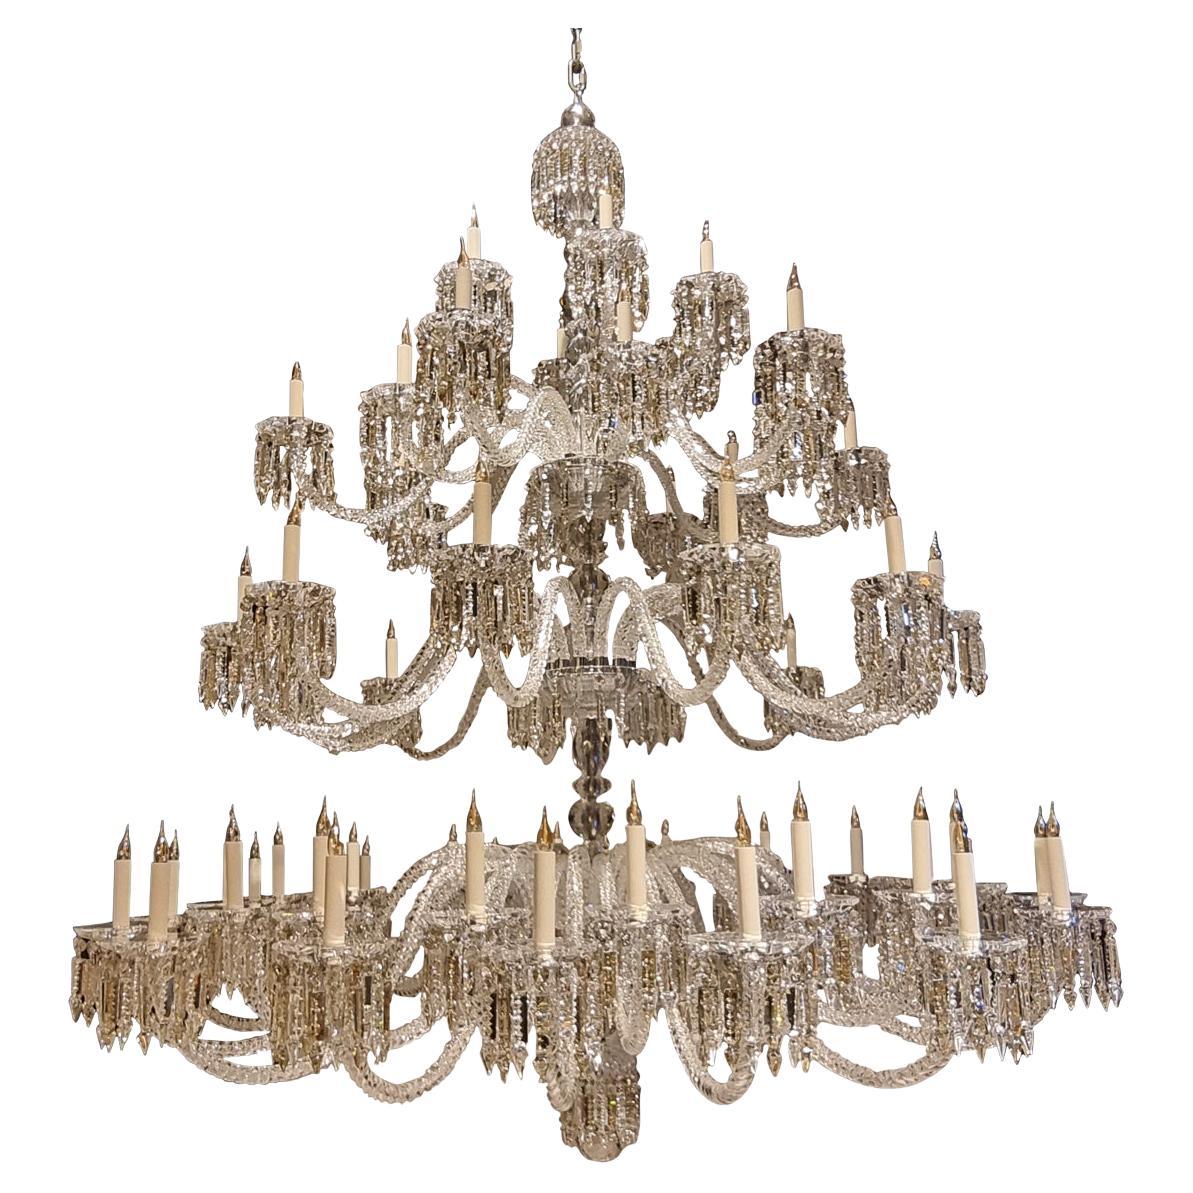 19th Century Crystal Chandelier with 62 Lights Inspired by Baccarat